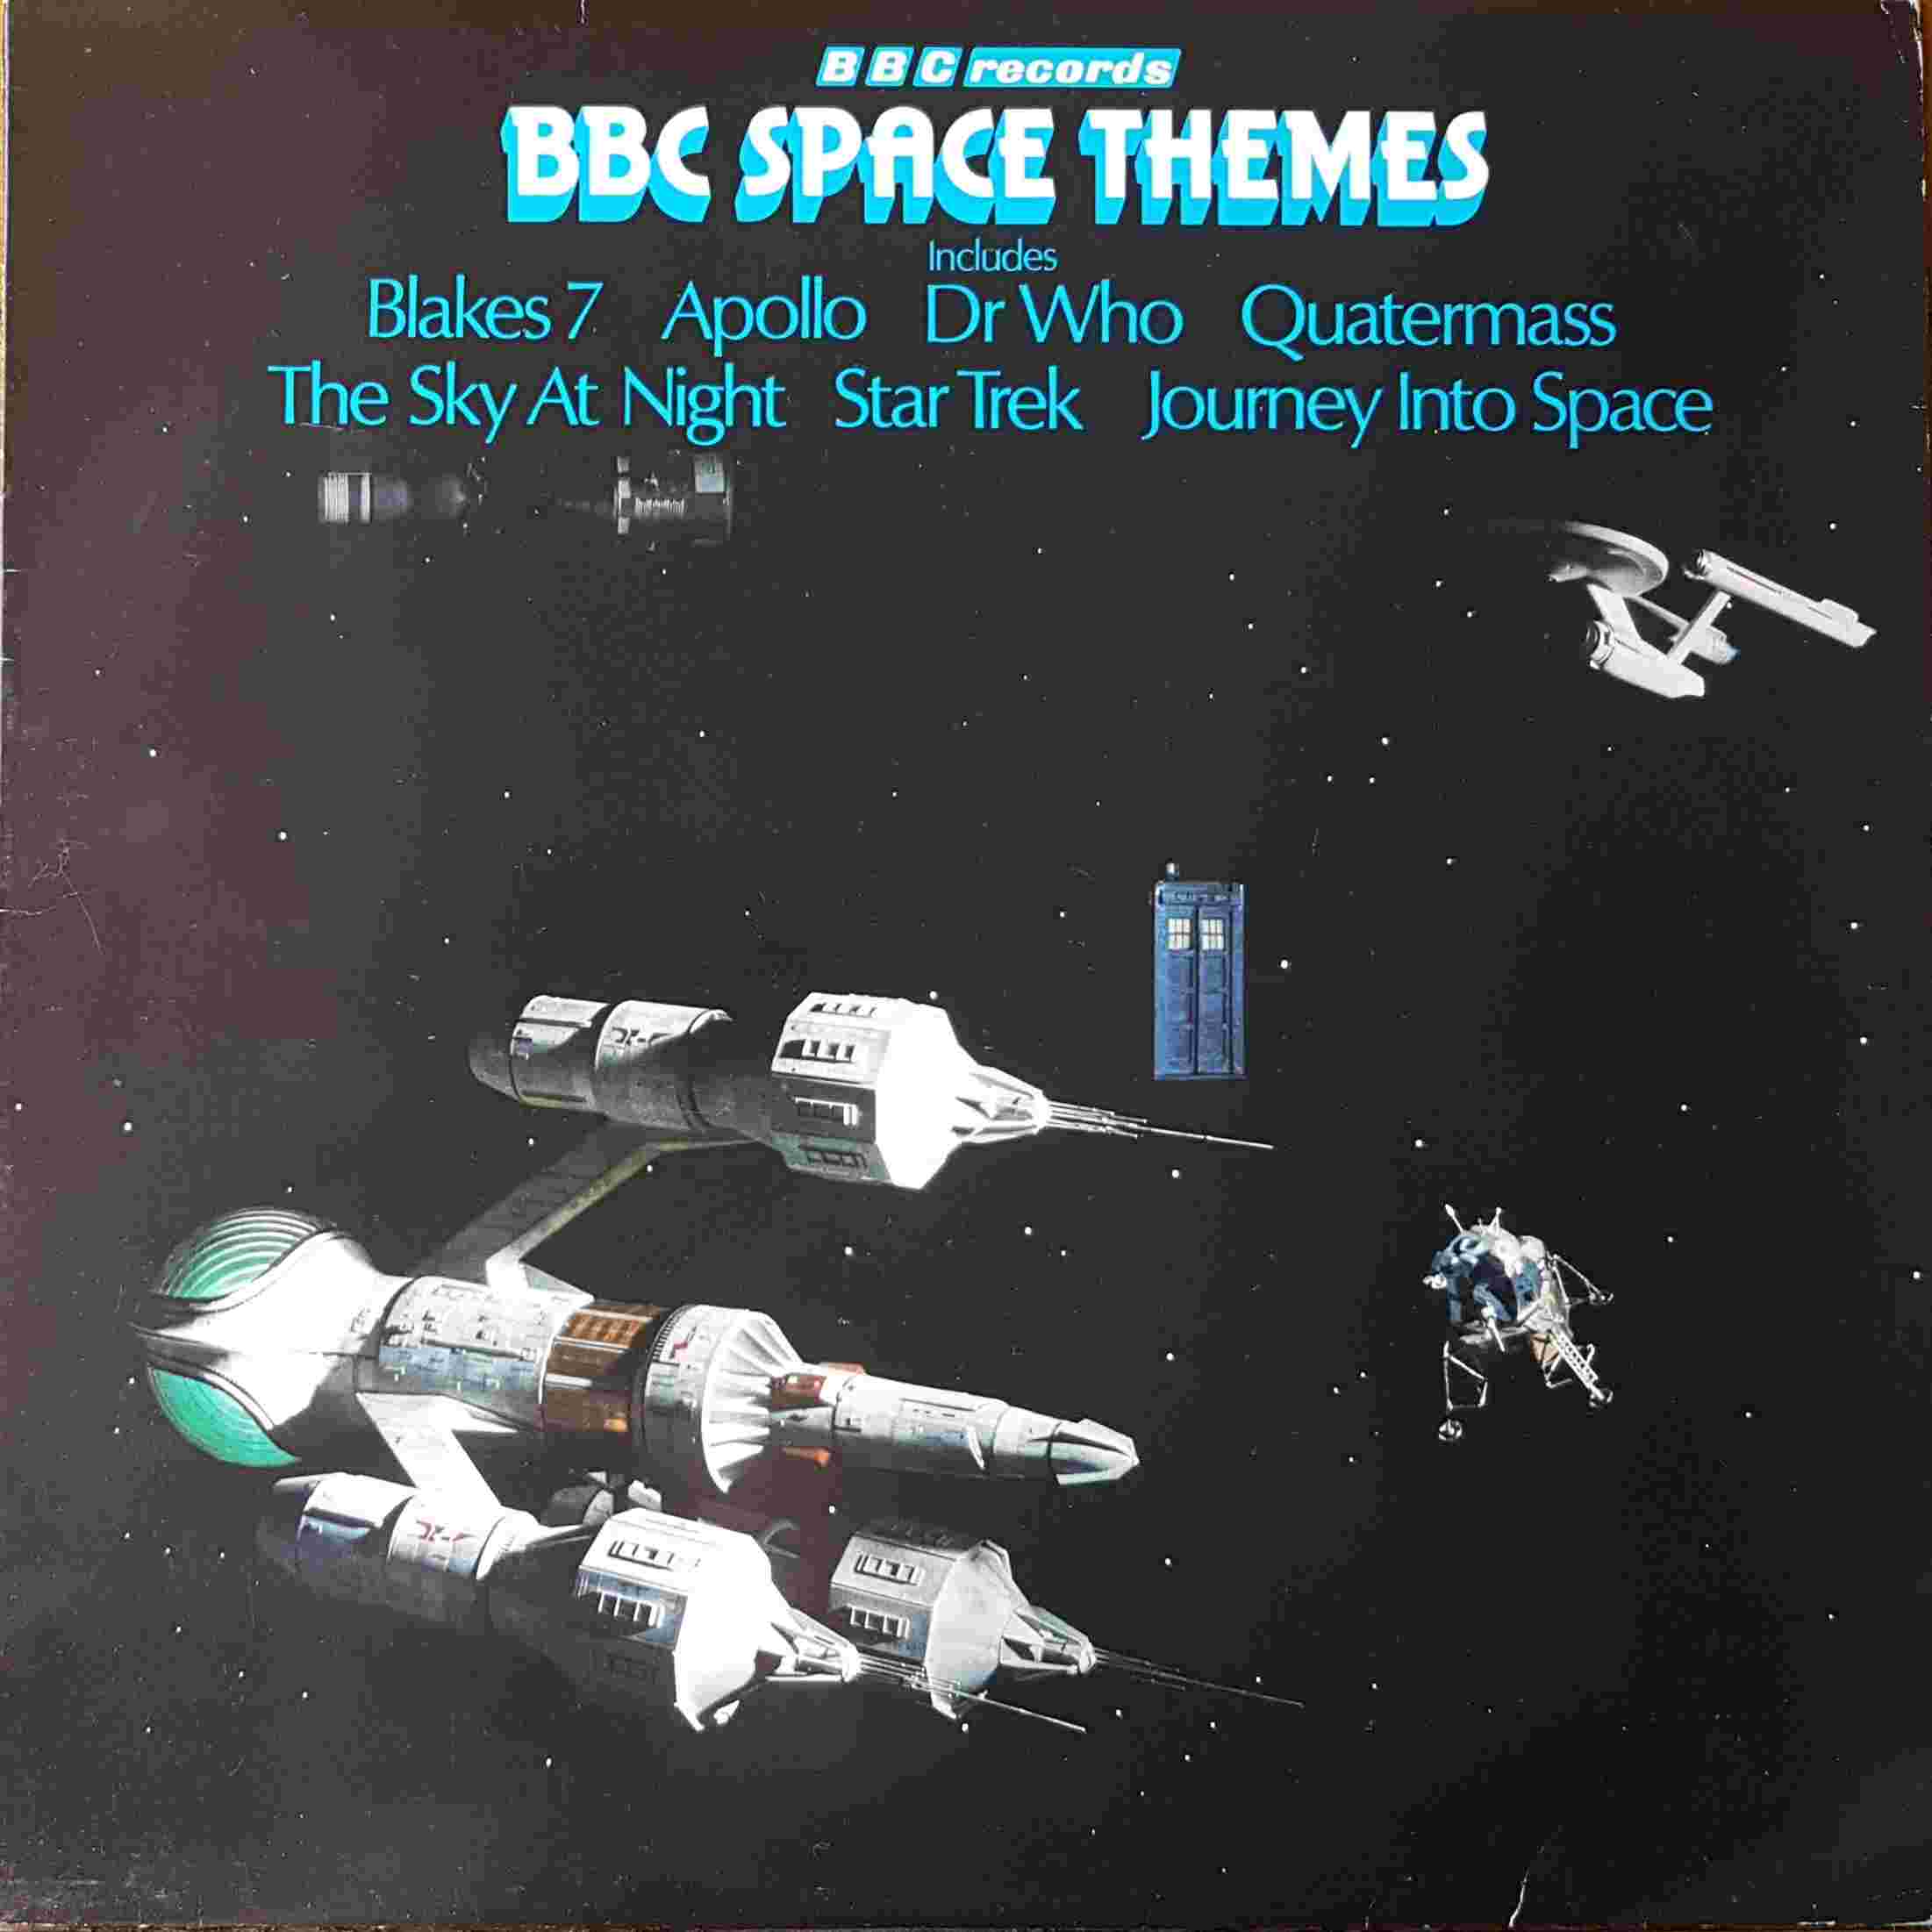 Picture of REH 324 BBC space themes by artist Various from the BBC albums - Records and Tapes library